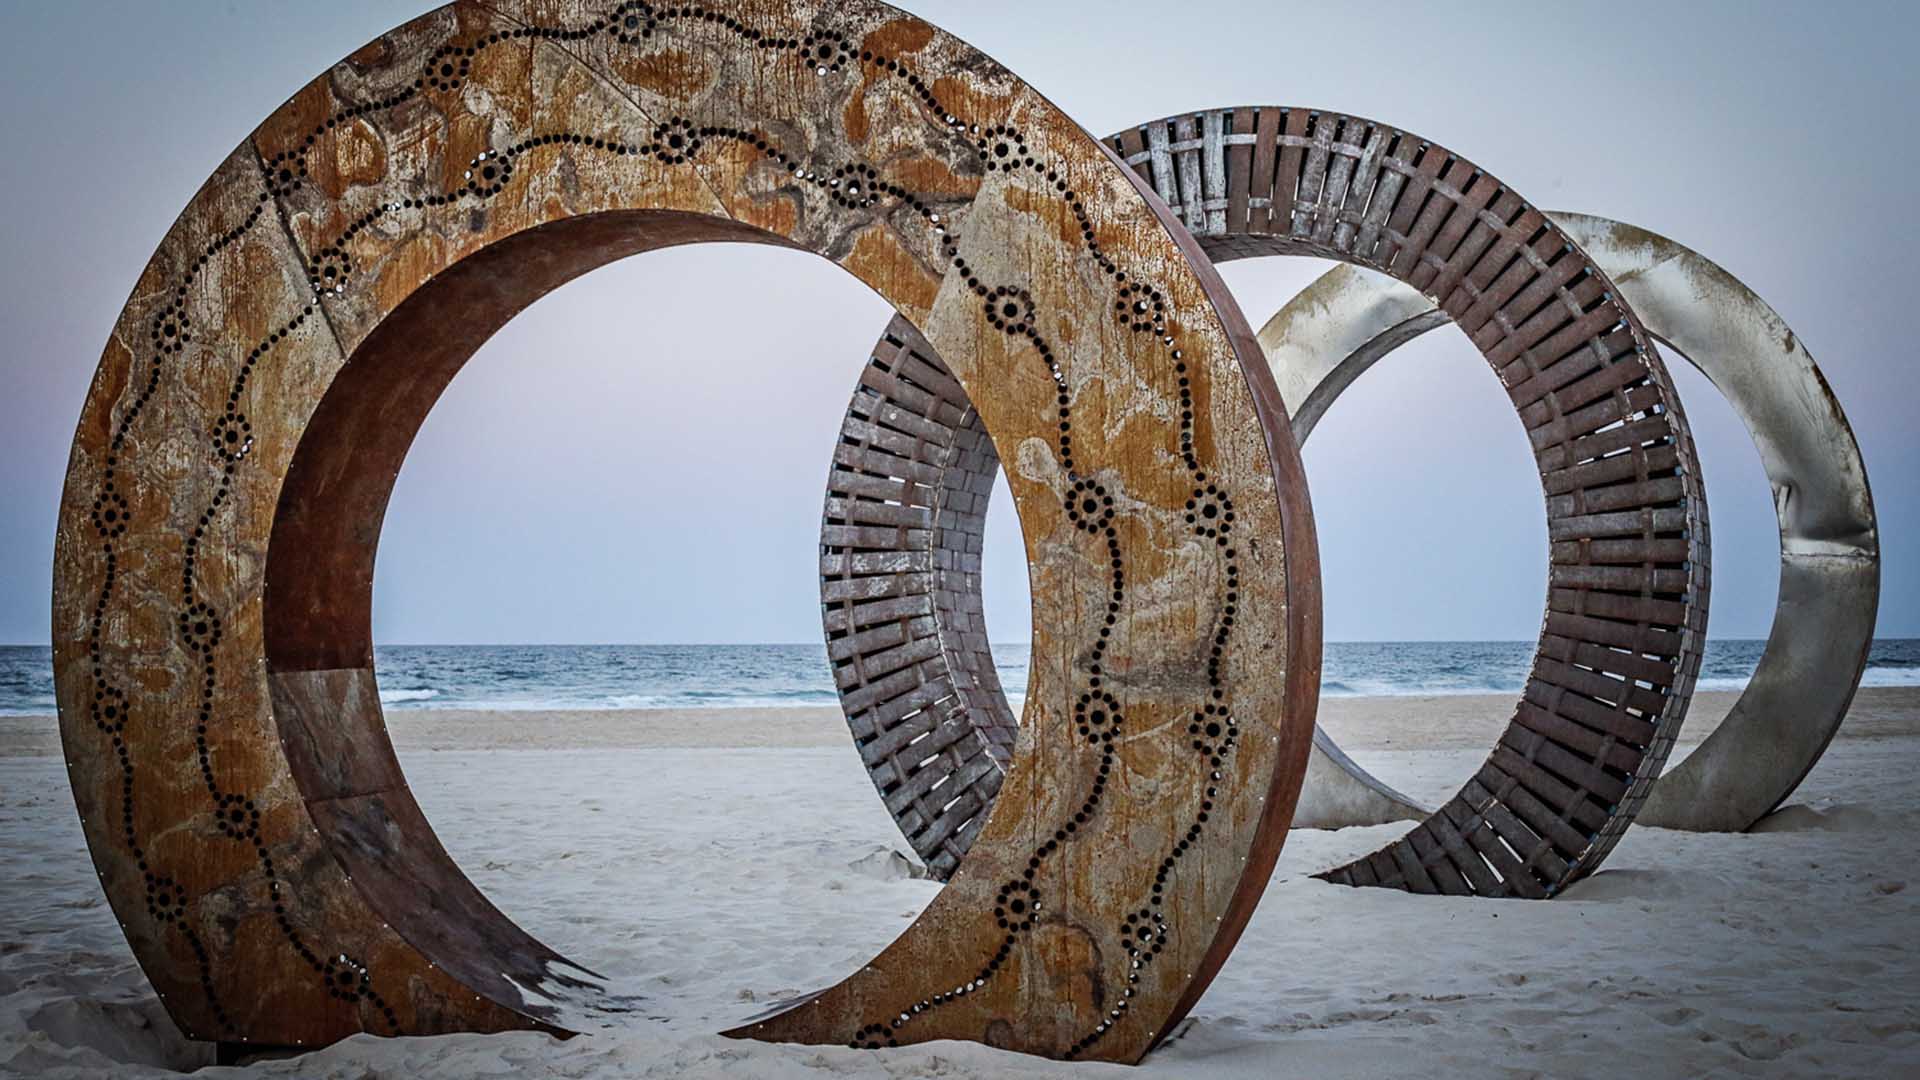 Swell Sculpture Festival Is Turning a One-Kilometre Stretch of Beach Into a Free Outdoor Art Gallery 